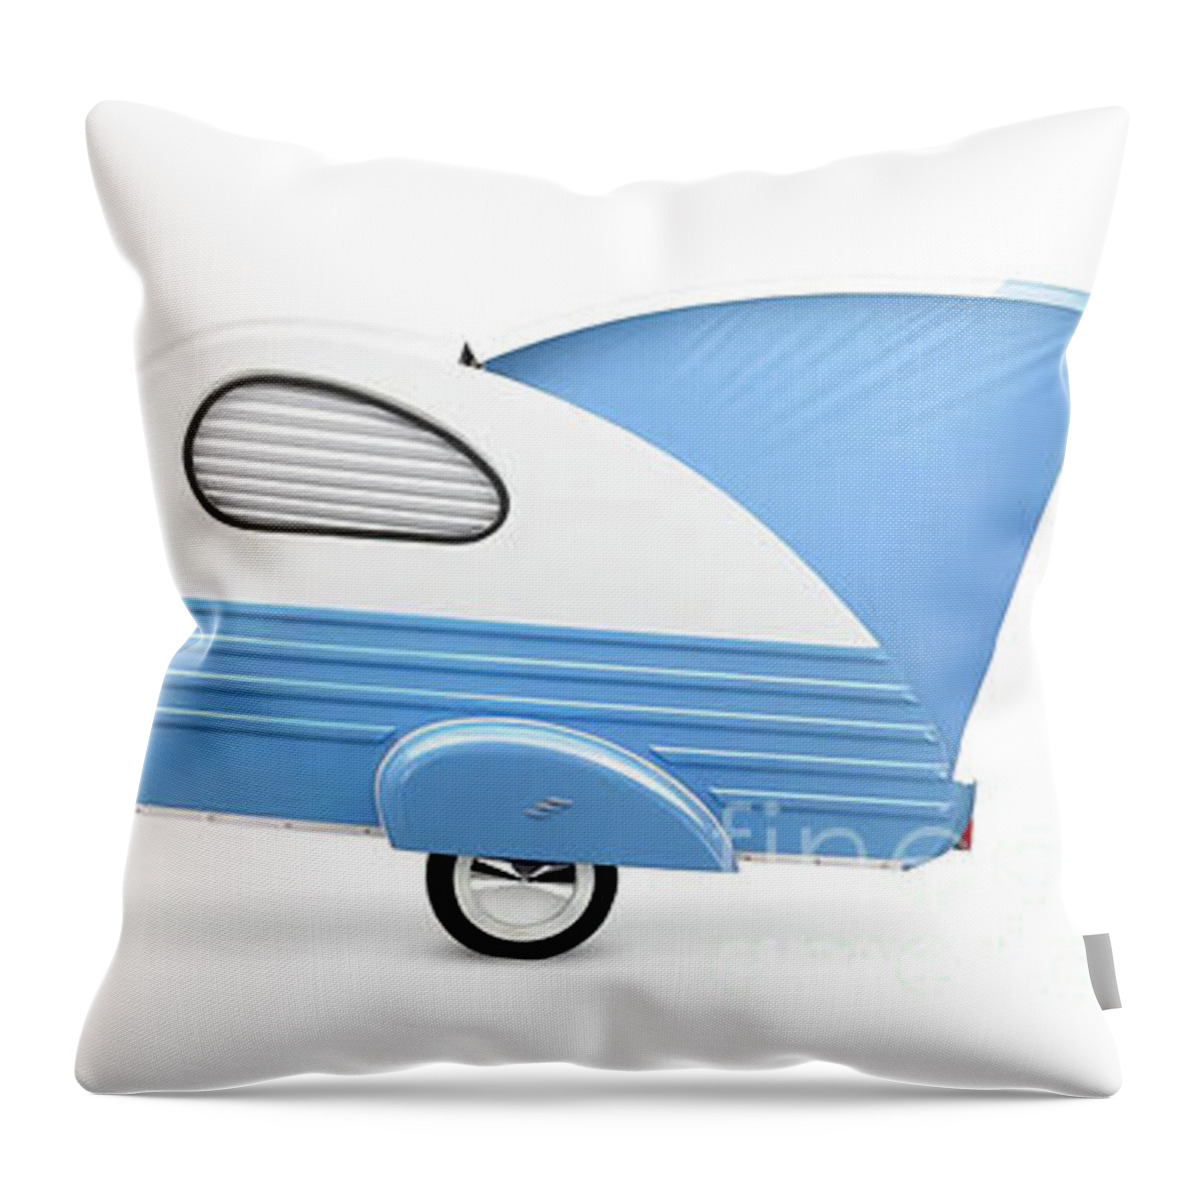 Vintage Throw Pillow featuring the photograph 1960s Isetta Microcar With Trailer by Retrographs